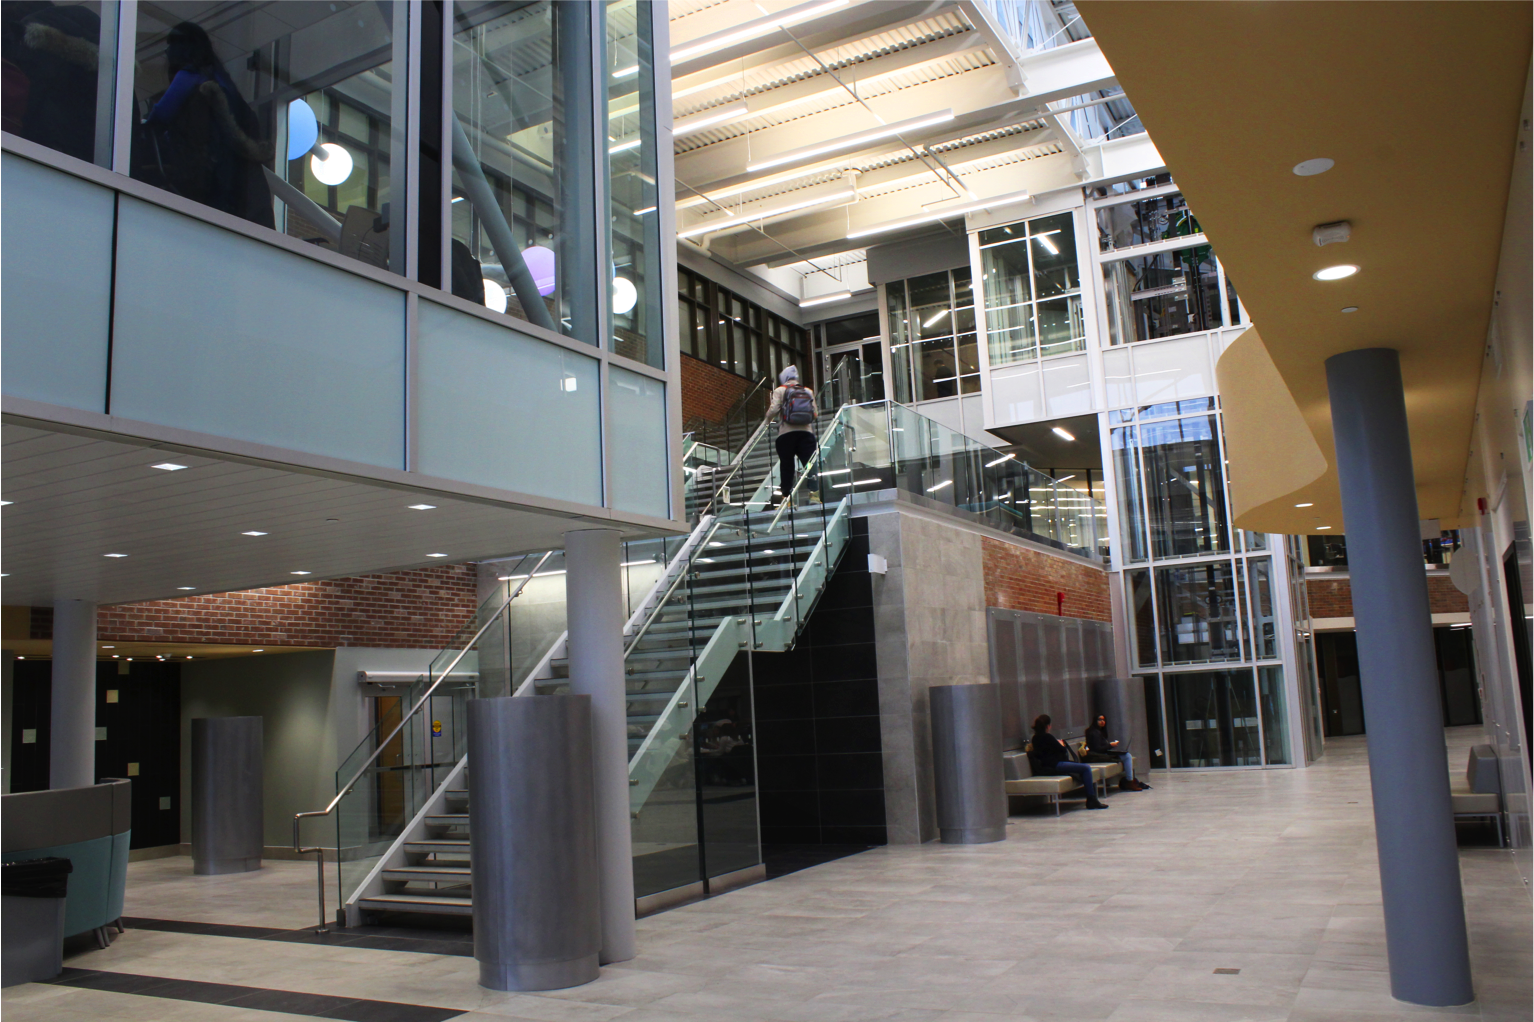 entrance to atrium area with stairs to upper level